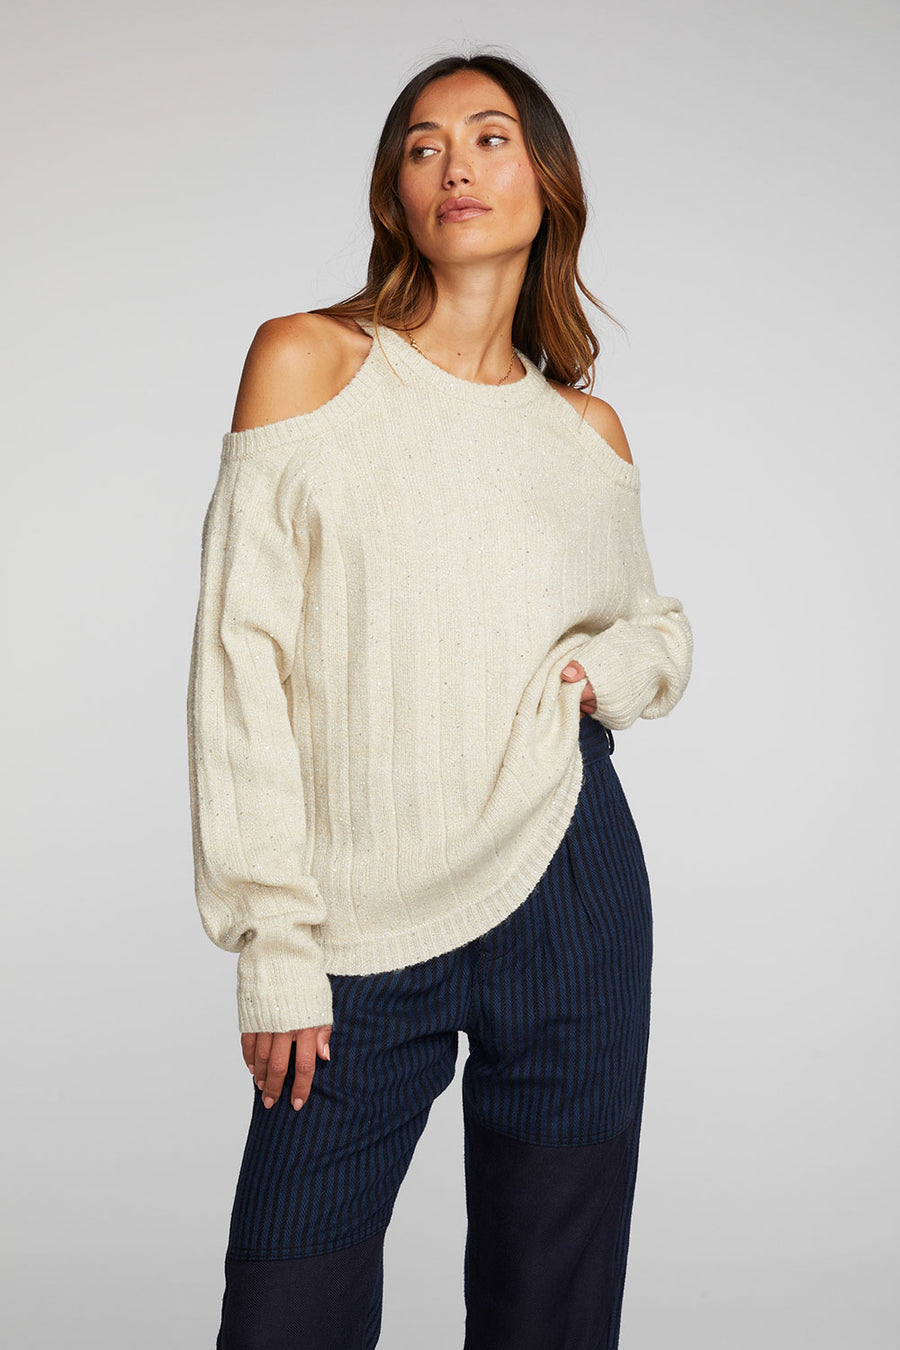 Sequin Knit Cold Shoulder Sweater Womens chaserbrand